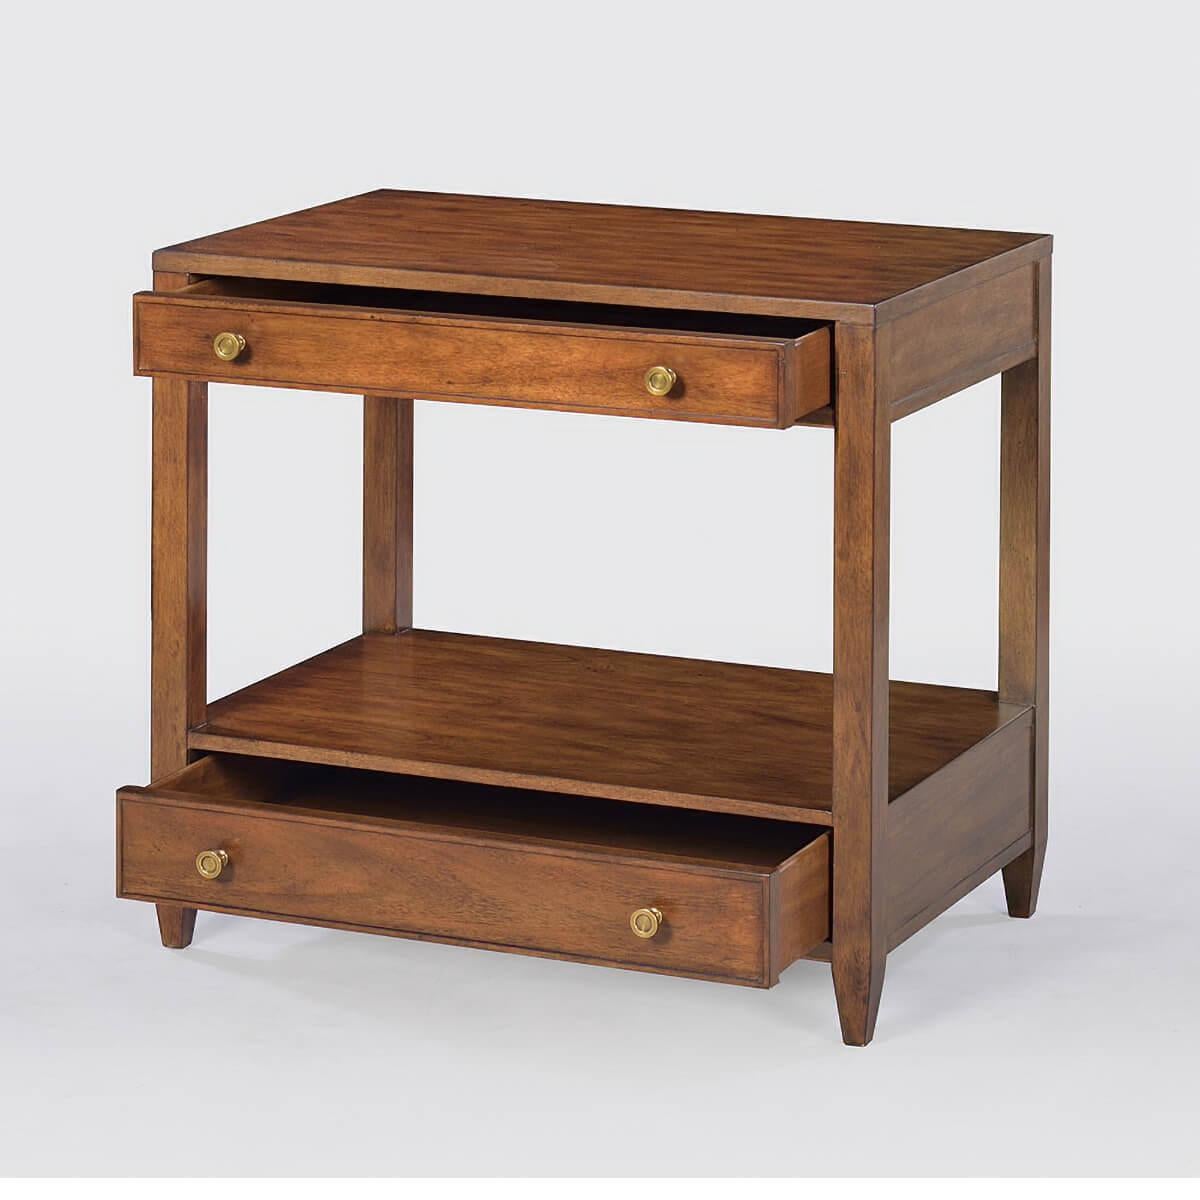 Classic nightstand - A wide rectangle side table with two drawers, brass hardware, and tapered feet, has a “rustic” warm walnut finish with subtle visual distressing and hand-rubbed finish.

Dimensions: 28